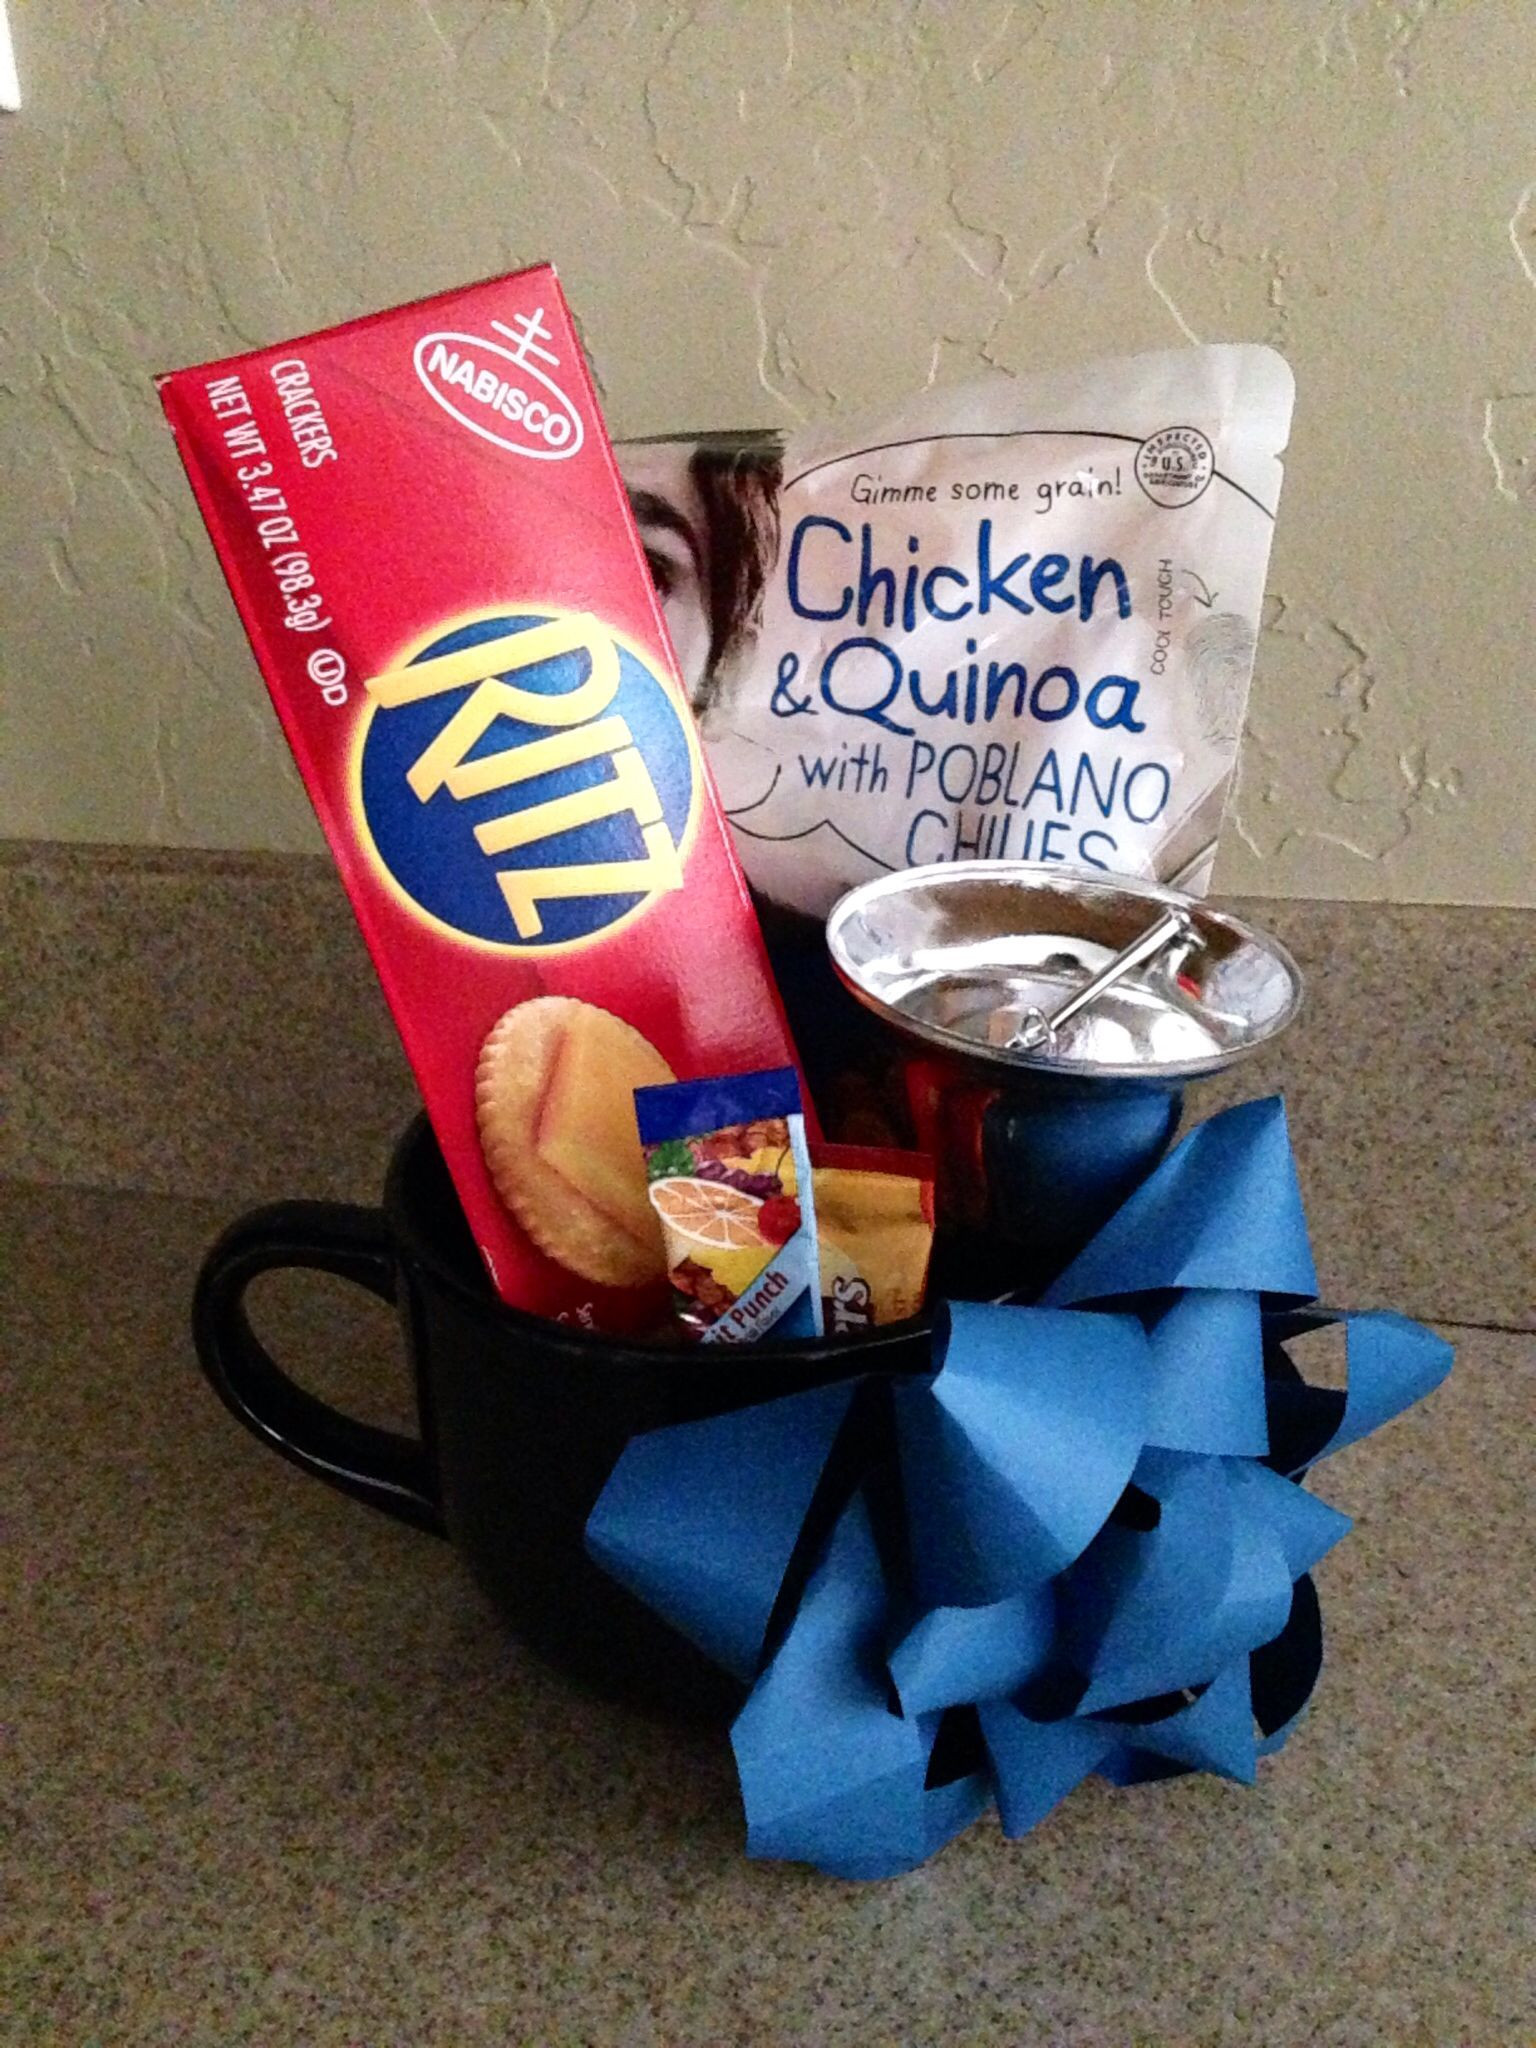 Soup Gift Basket Ideas
 DIY "Get Well Soon" Care Gift Idea Cambell s Soup Bag